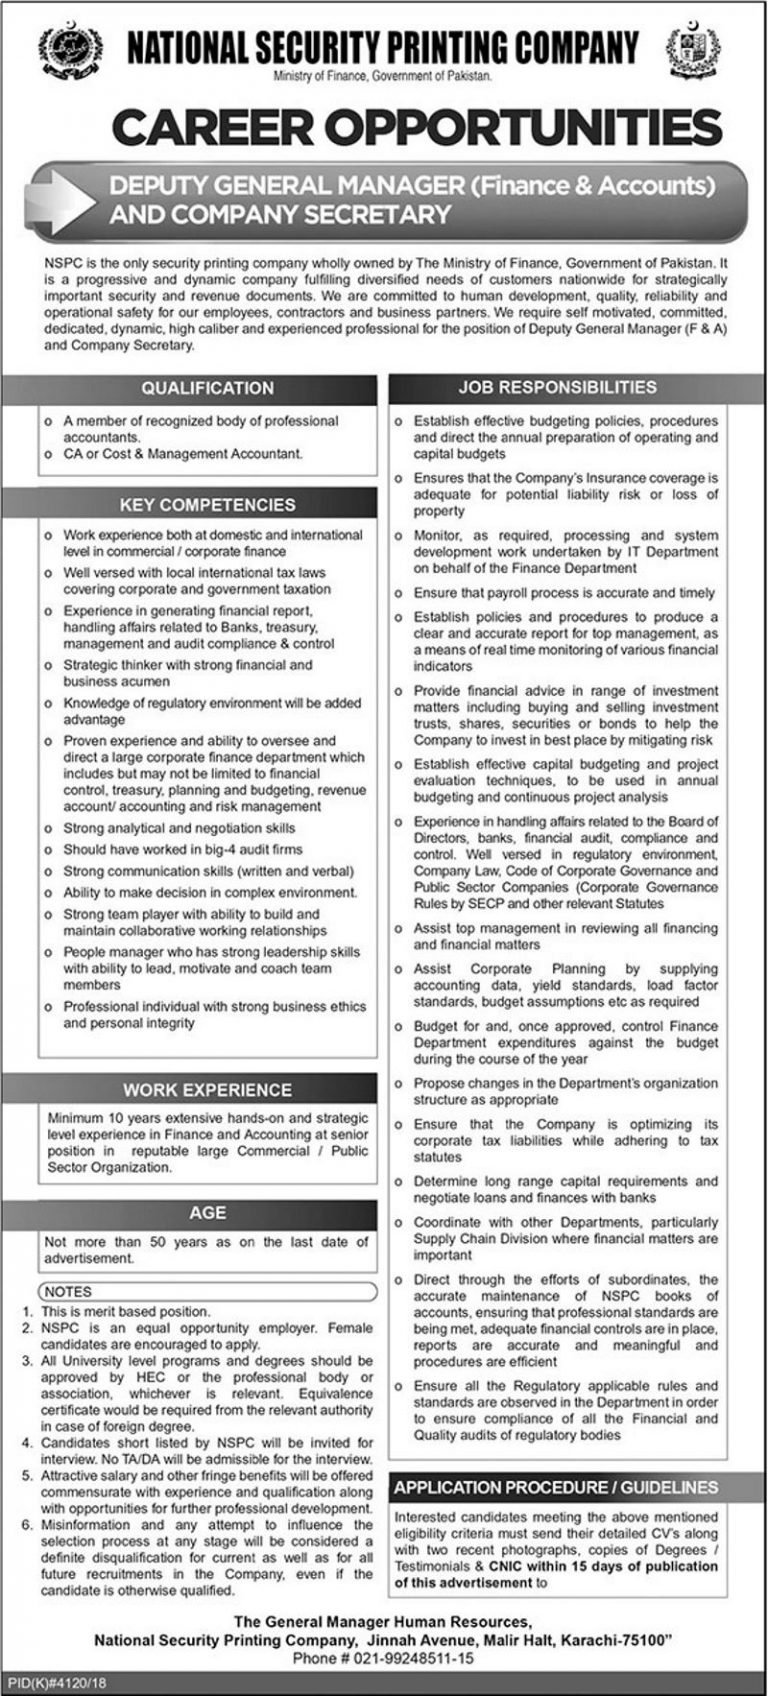 National Security Printing Company (NSPC) Jobs 2019 for Deputy General Manager / Finance & Accounts and Company Secretary